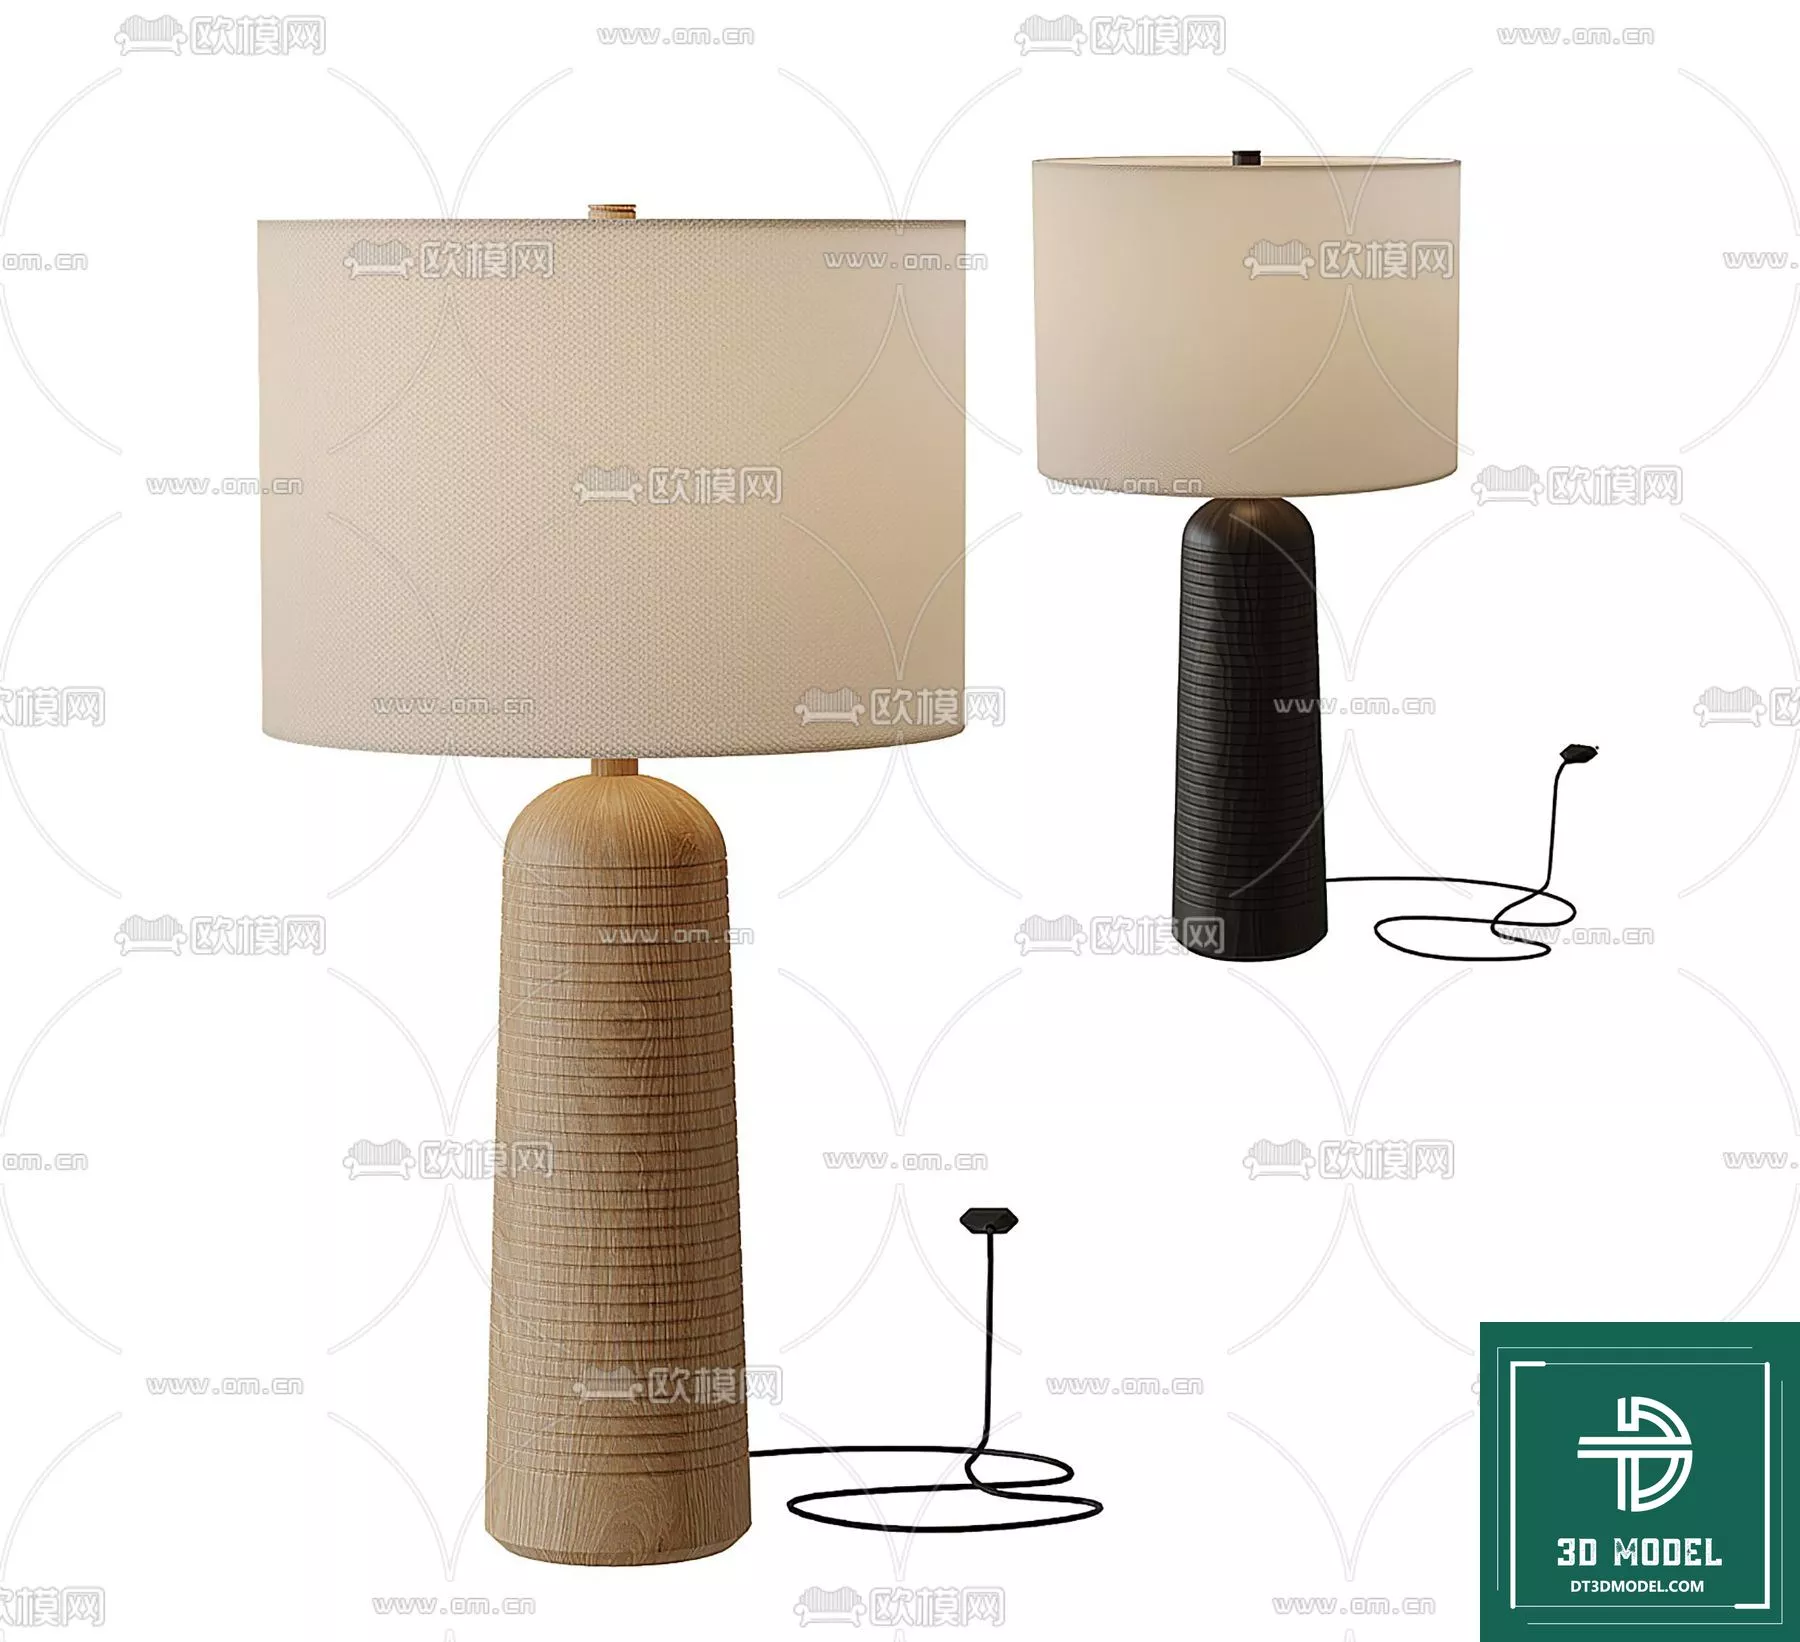 MODERN TABLE LAMP - SKETCHUP 3D MODEL - VRAY OR ENSCAPE - ID14494